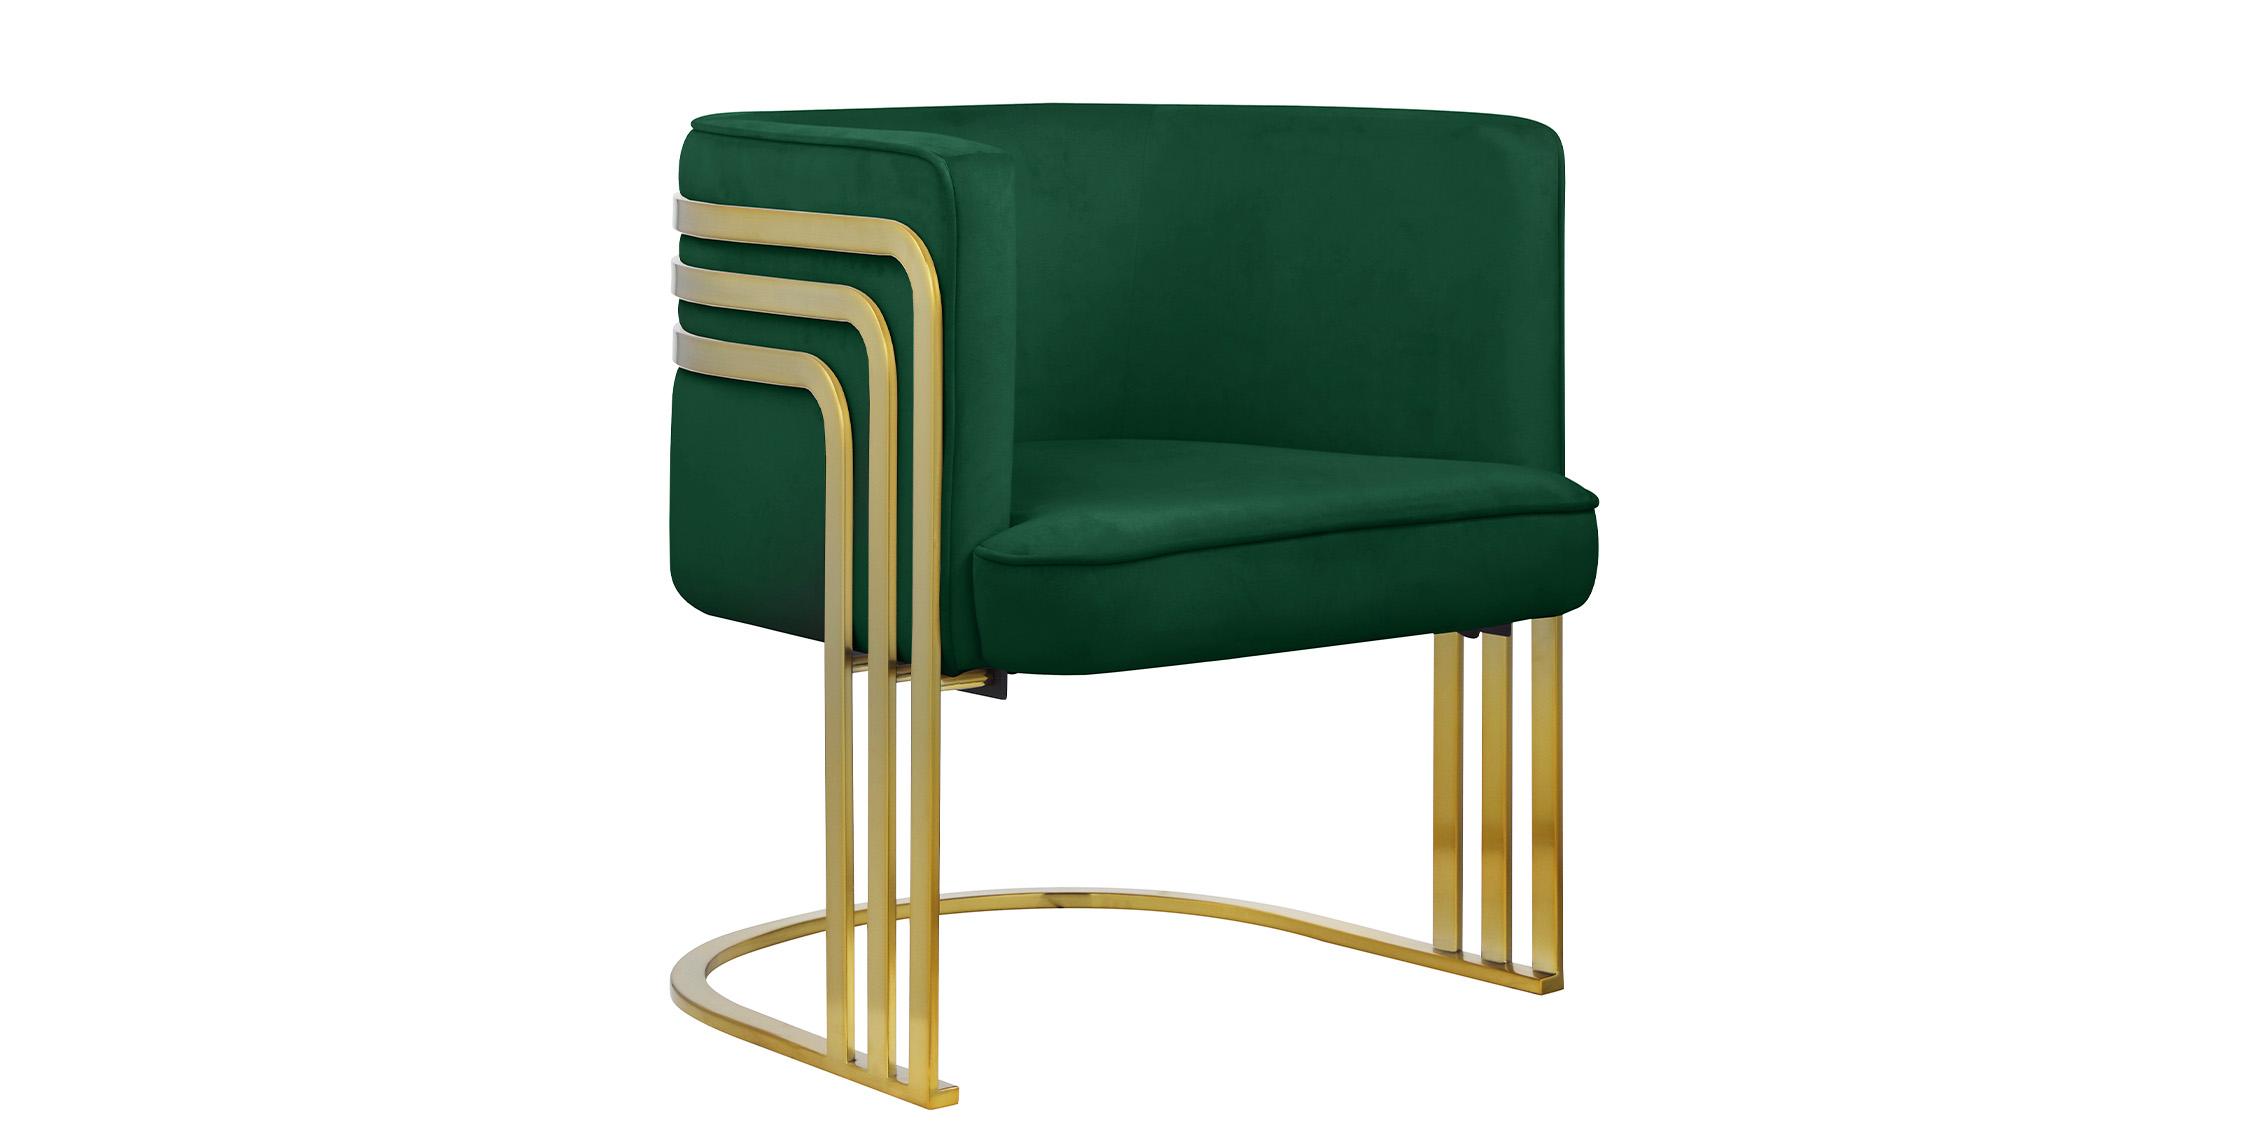 Meridian Furniture RAYS 533Green Accent Chair